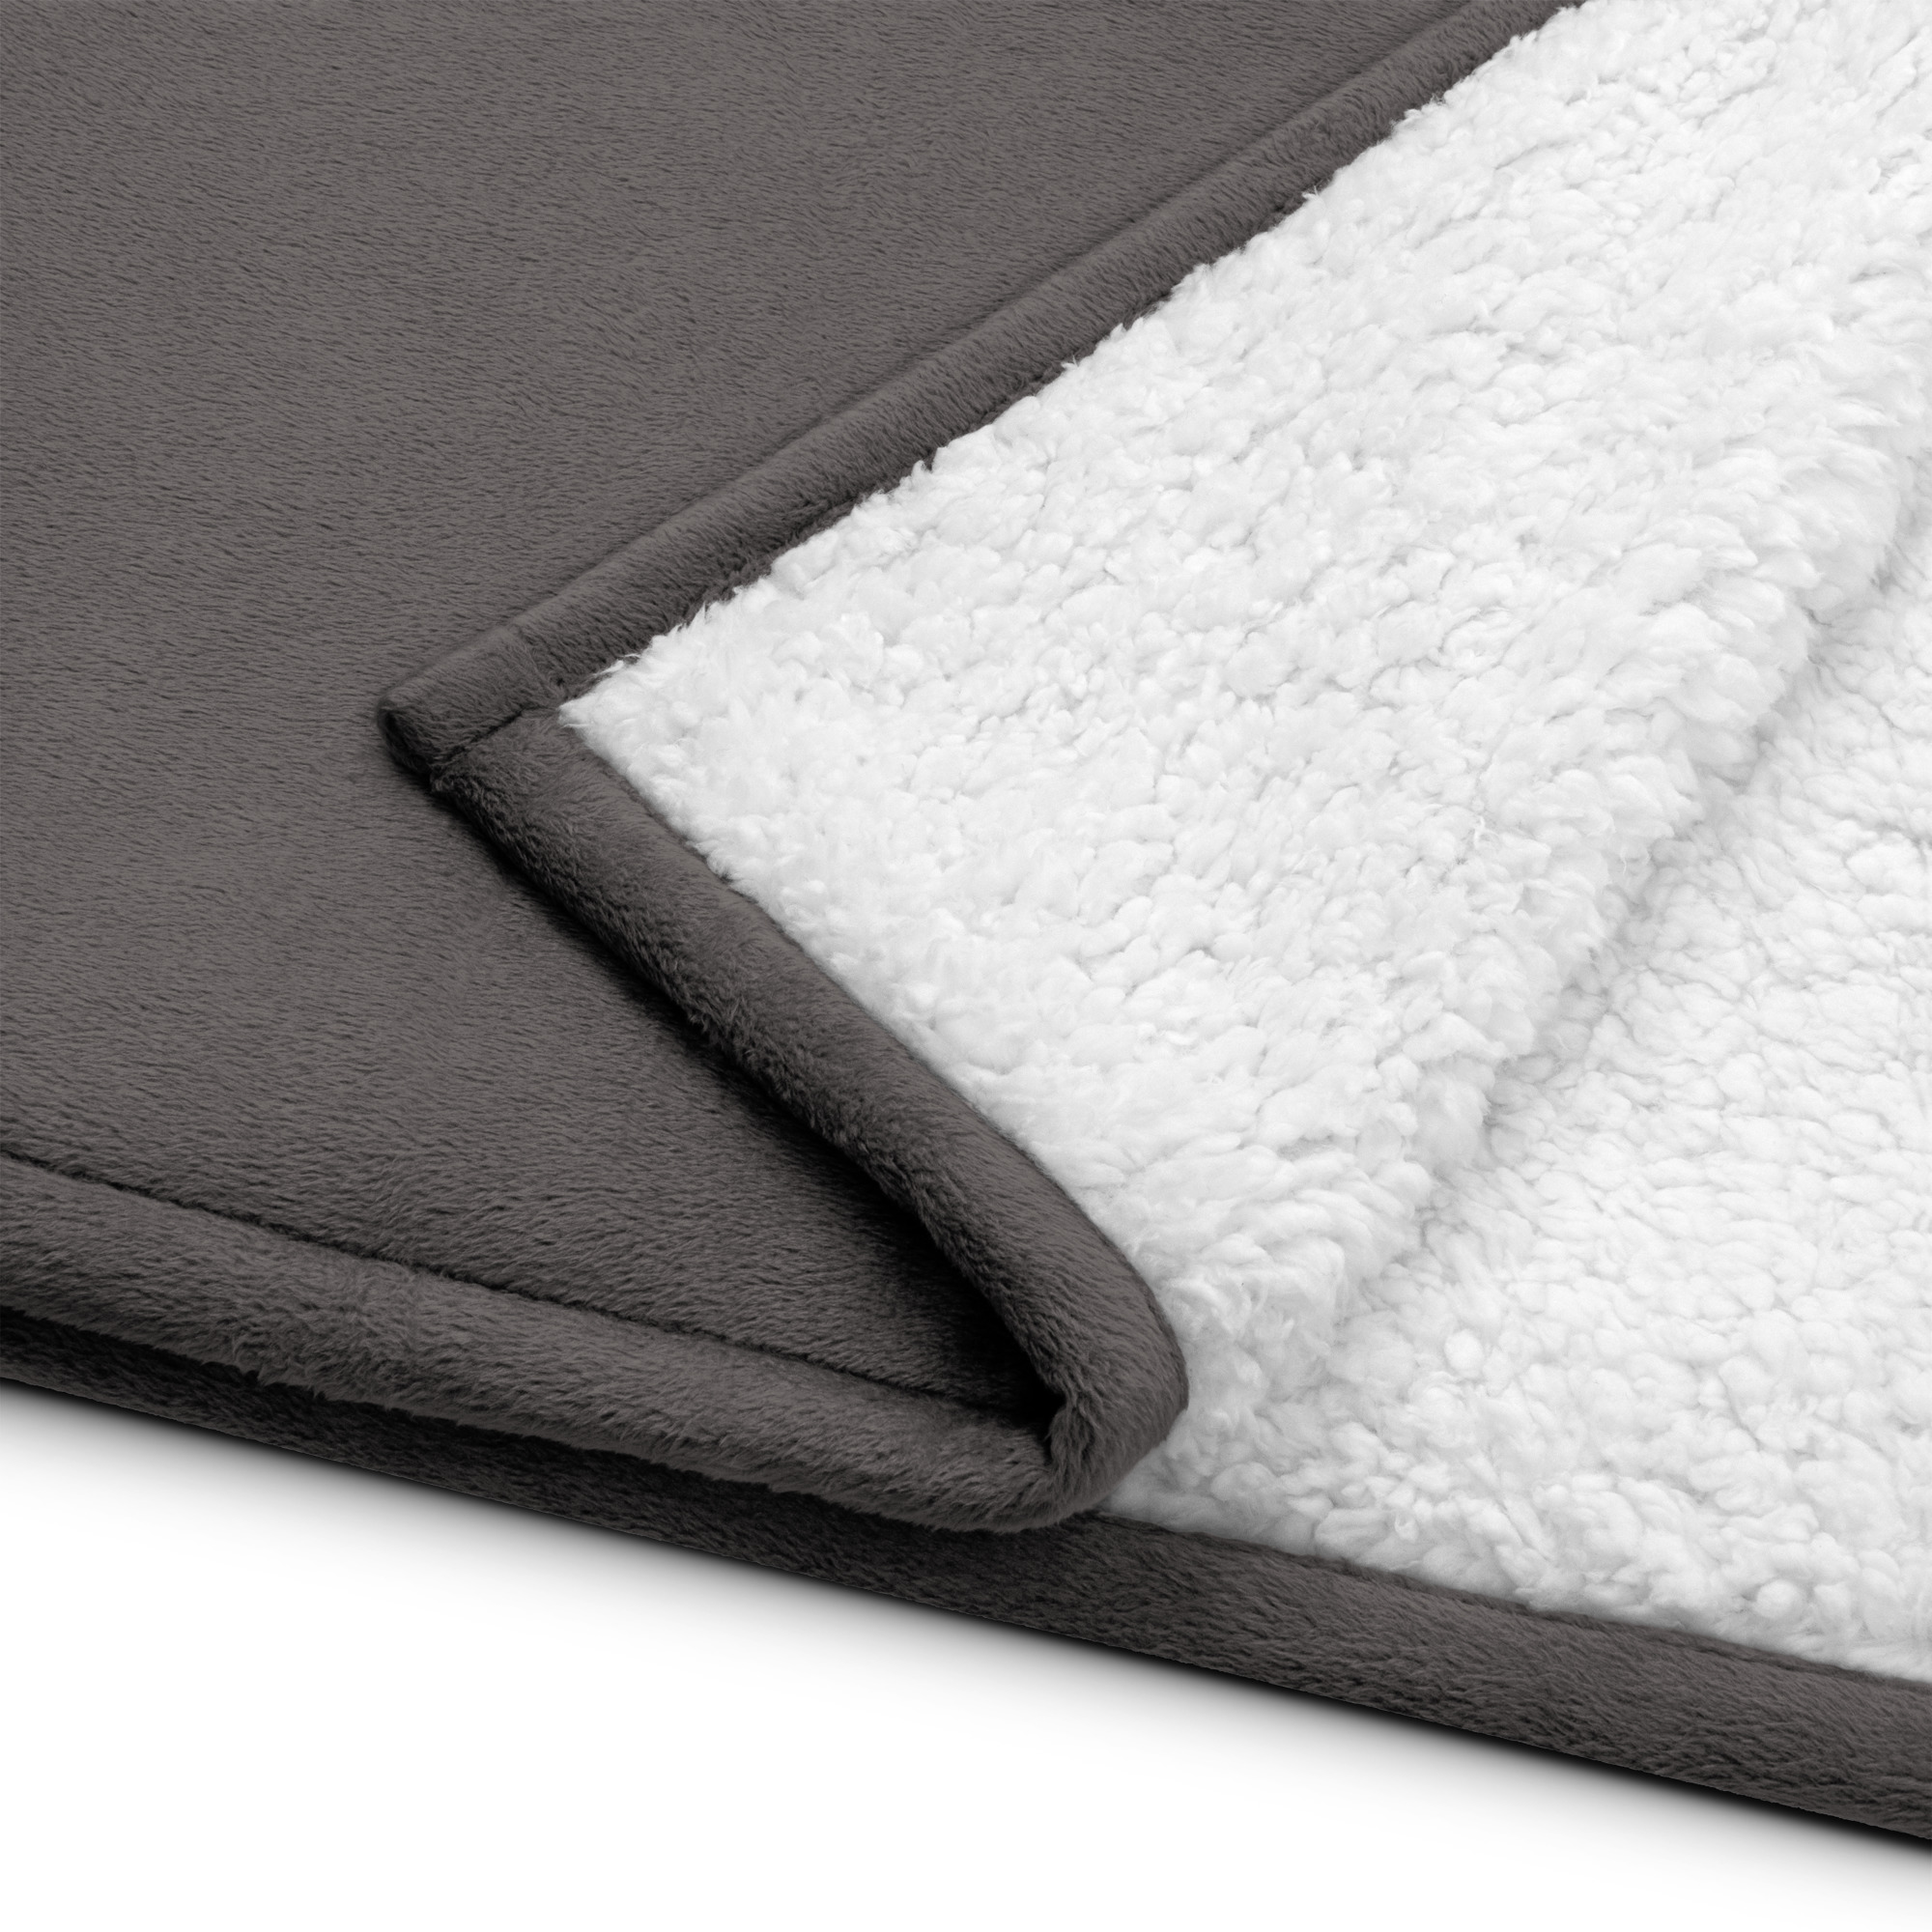 embroidered-premium-sherpa-blanket-heather-grey-product-details-2-64c04fd0f2e31.jpg